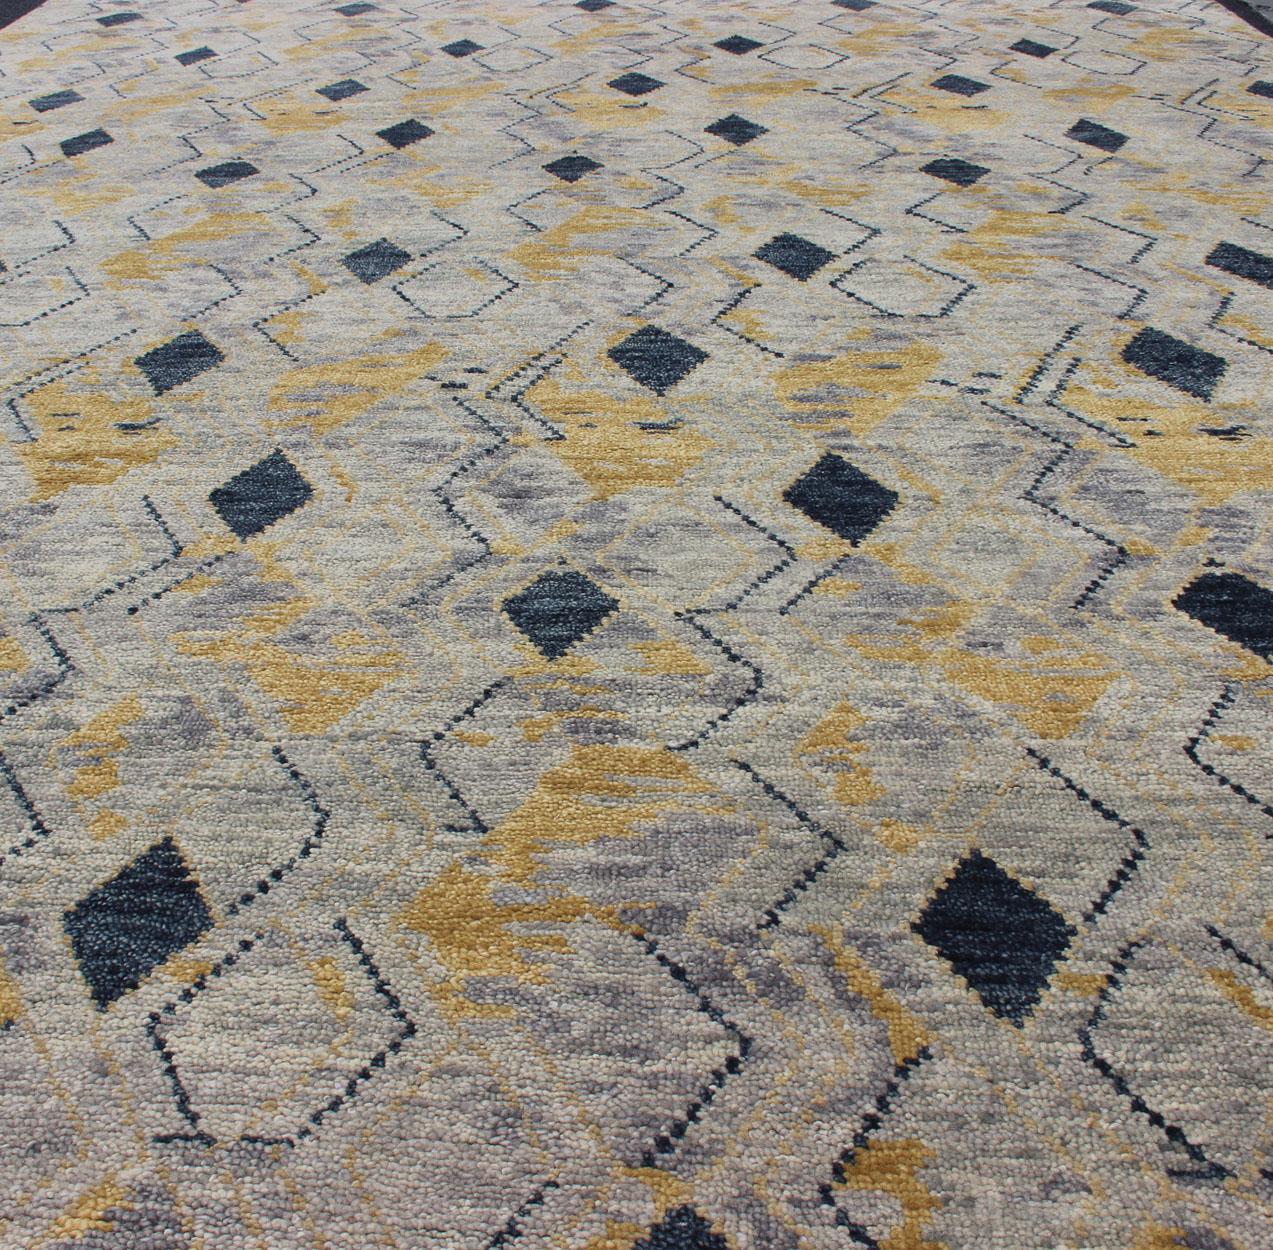 Large Modern Rug With Diamond Design in Yellow and Blue. 

Measures 10'1 x 13'10
This modern rug features a blue and yellow diamond pattern, lining the entire rug in vertical columns. The background is a light gray, giving this piece a rustic charm.